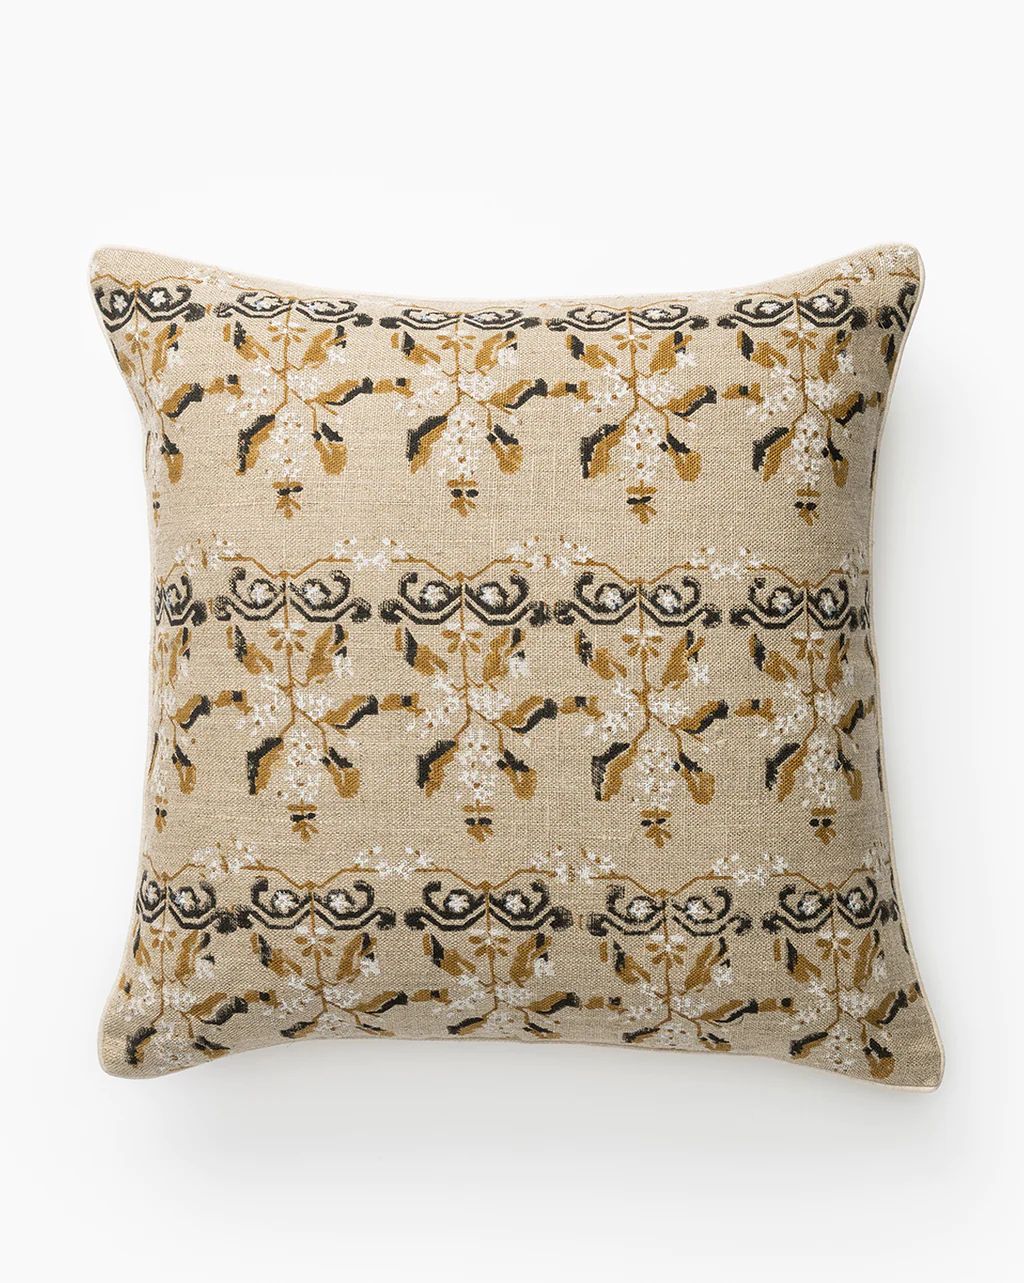 Meryl Pillow Cover | McGee & Co.